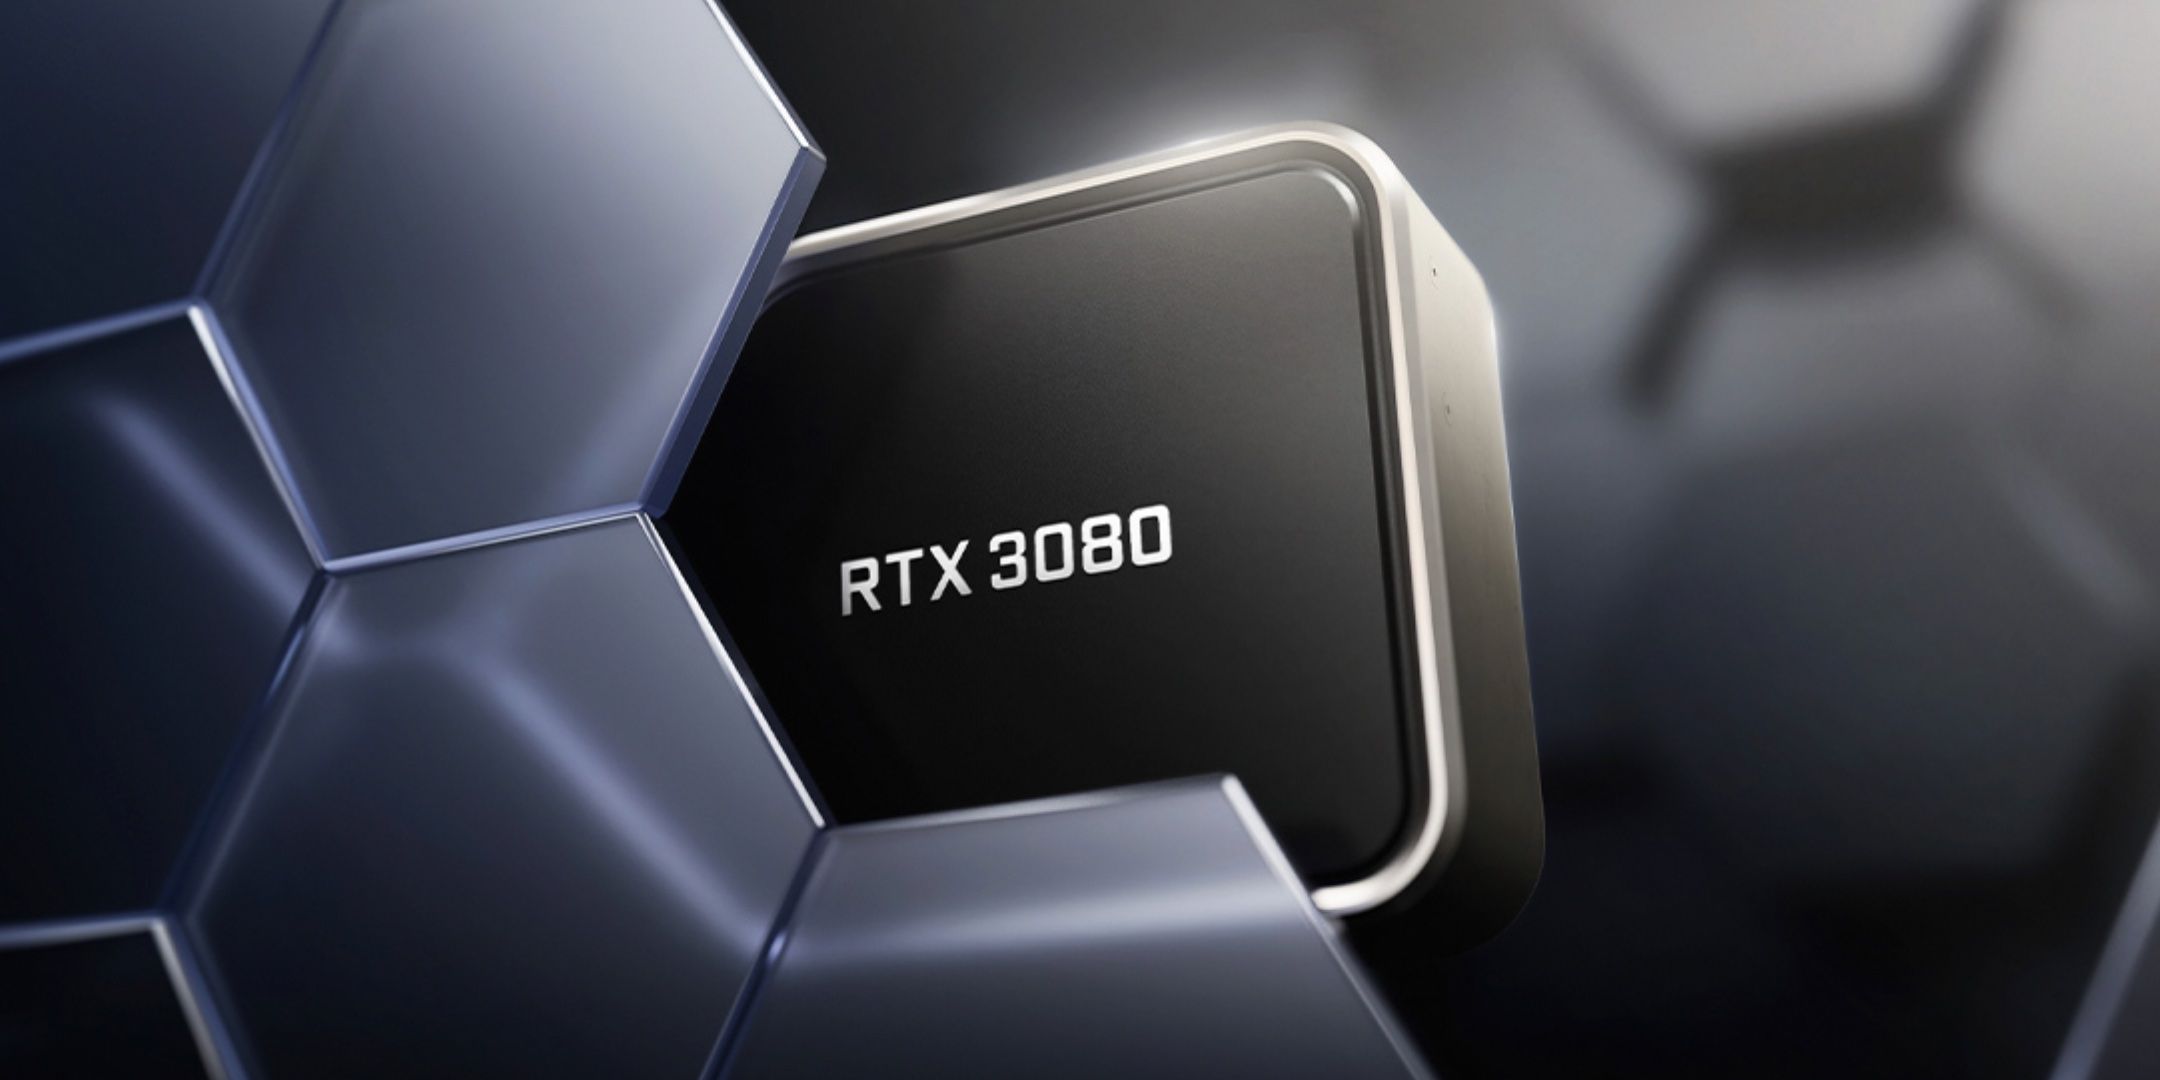 Promotional image of an RTX 3080.